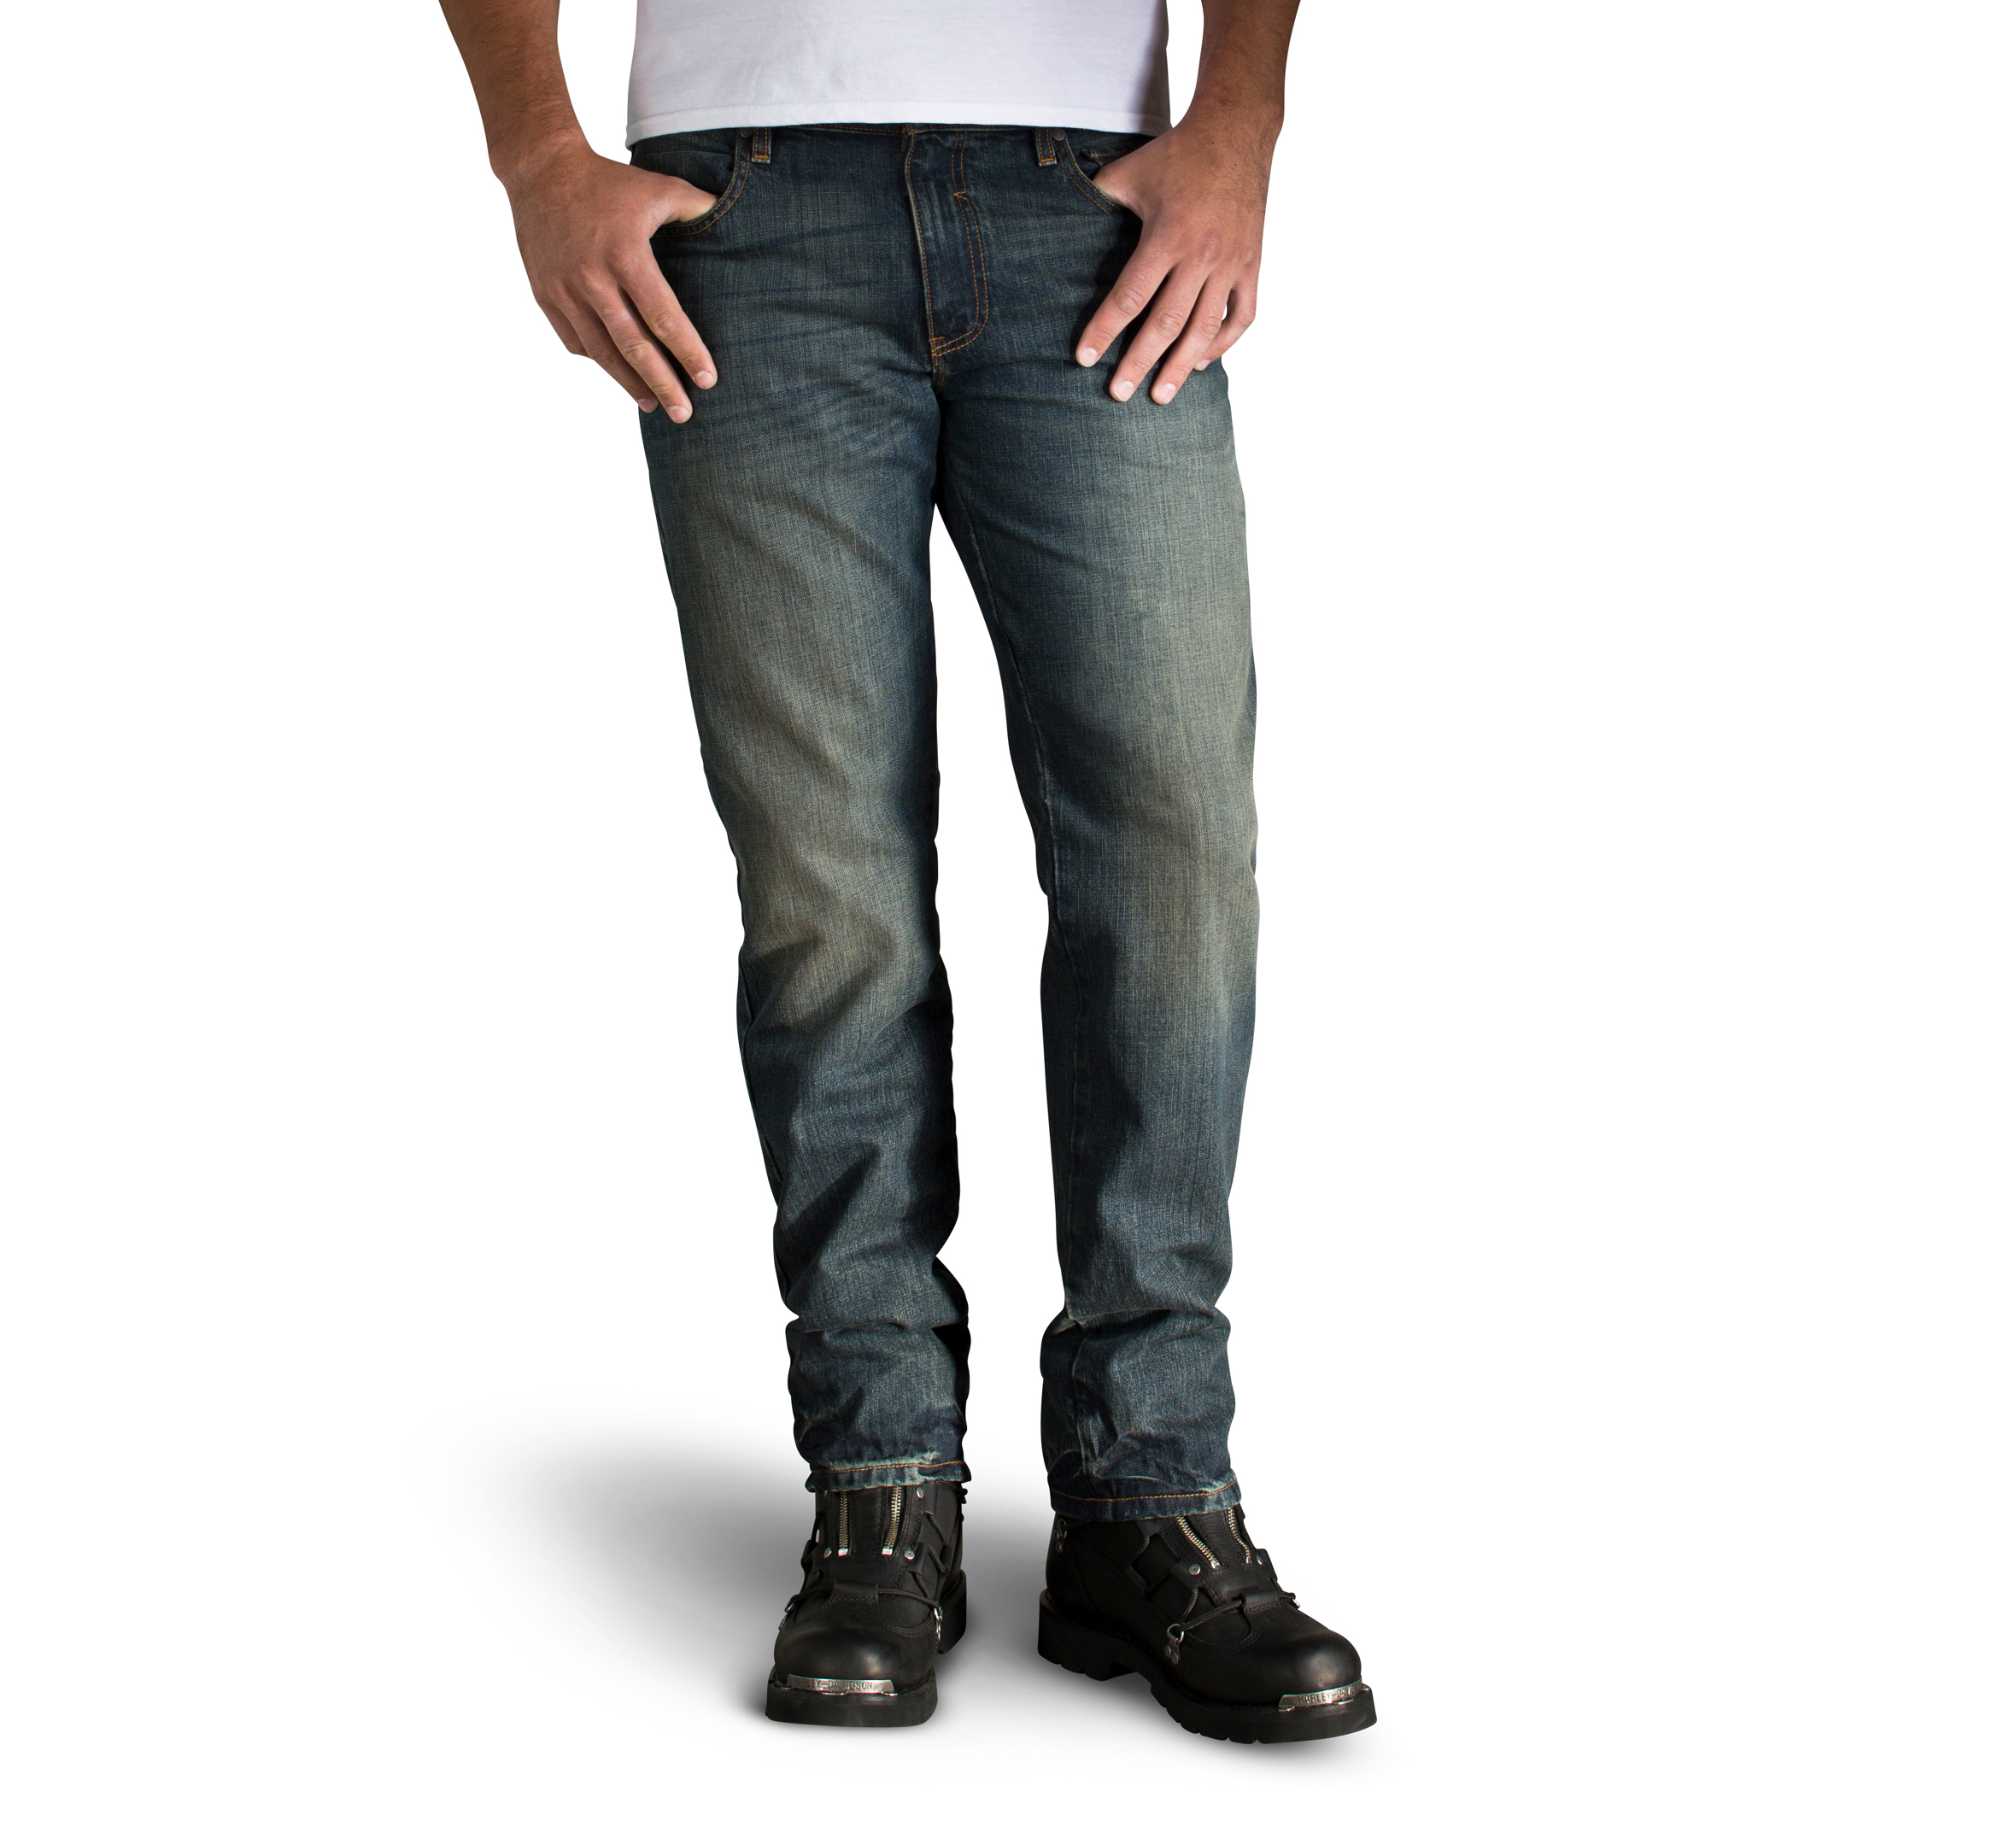 Make Your Selection: Denim Or Chino - Functional Comfort | Sweet-Orr